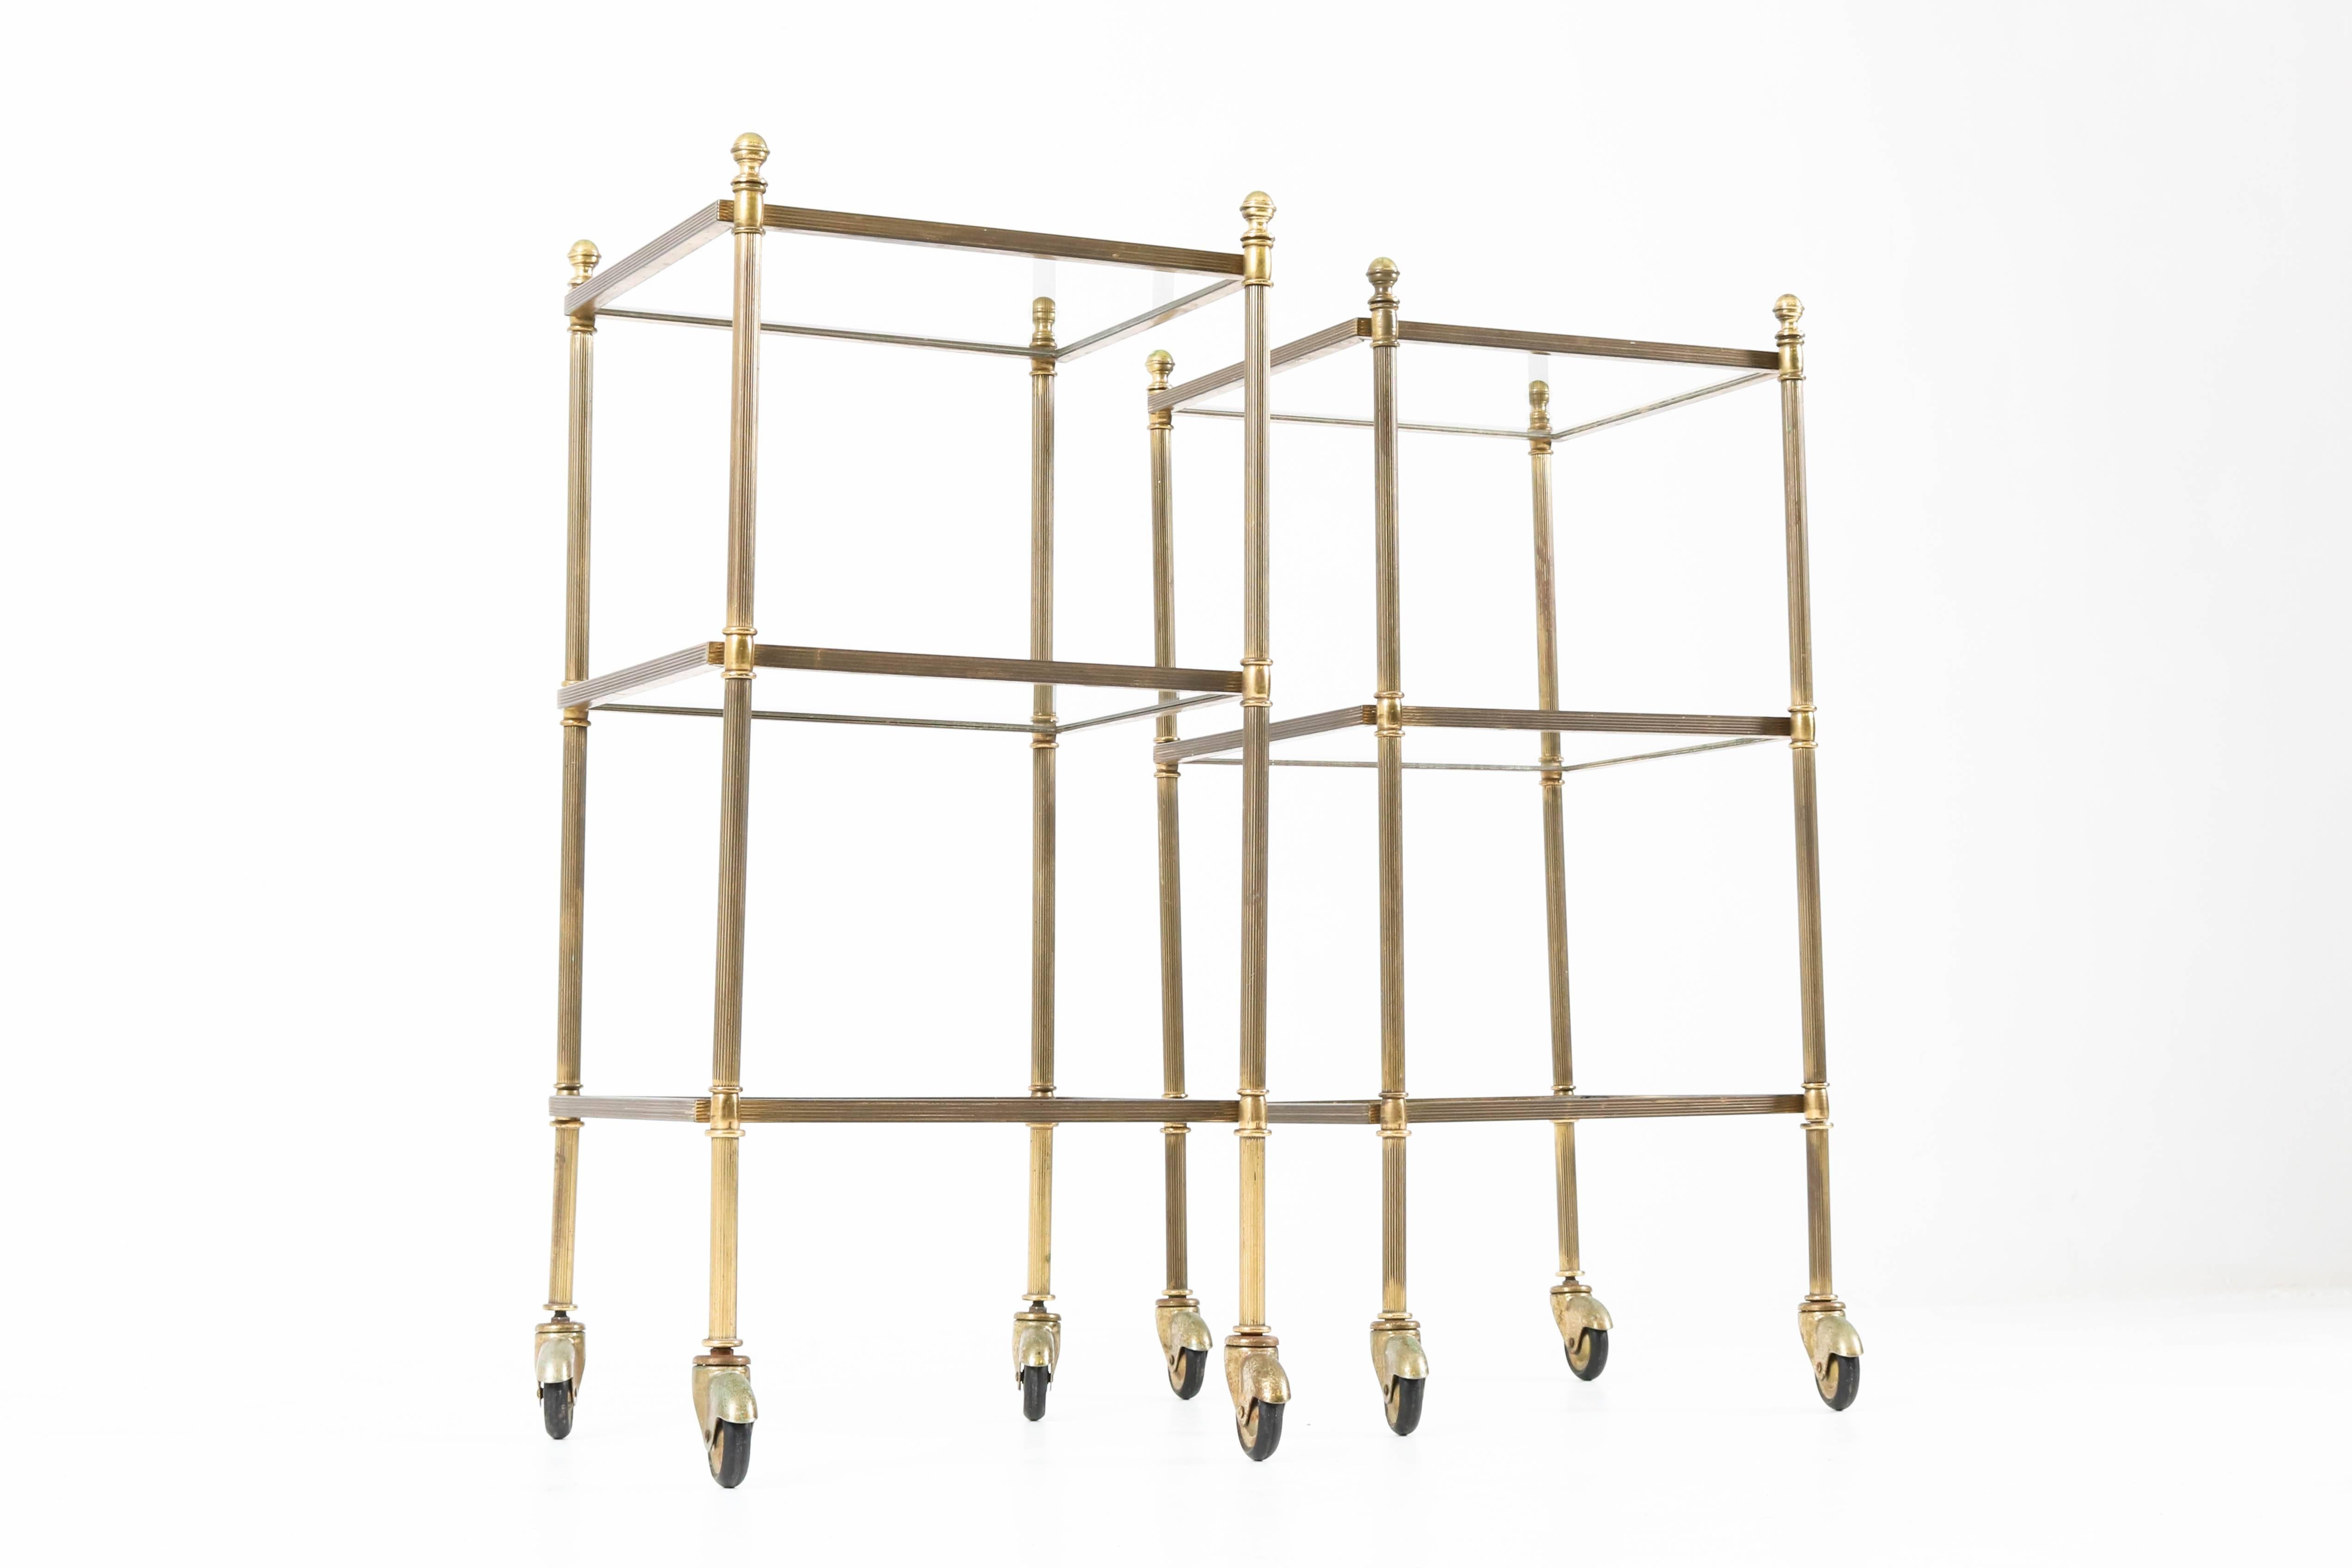 French Pair of Mid-Century Modern Brass Maison Jansen Side Tables, 1950s